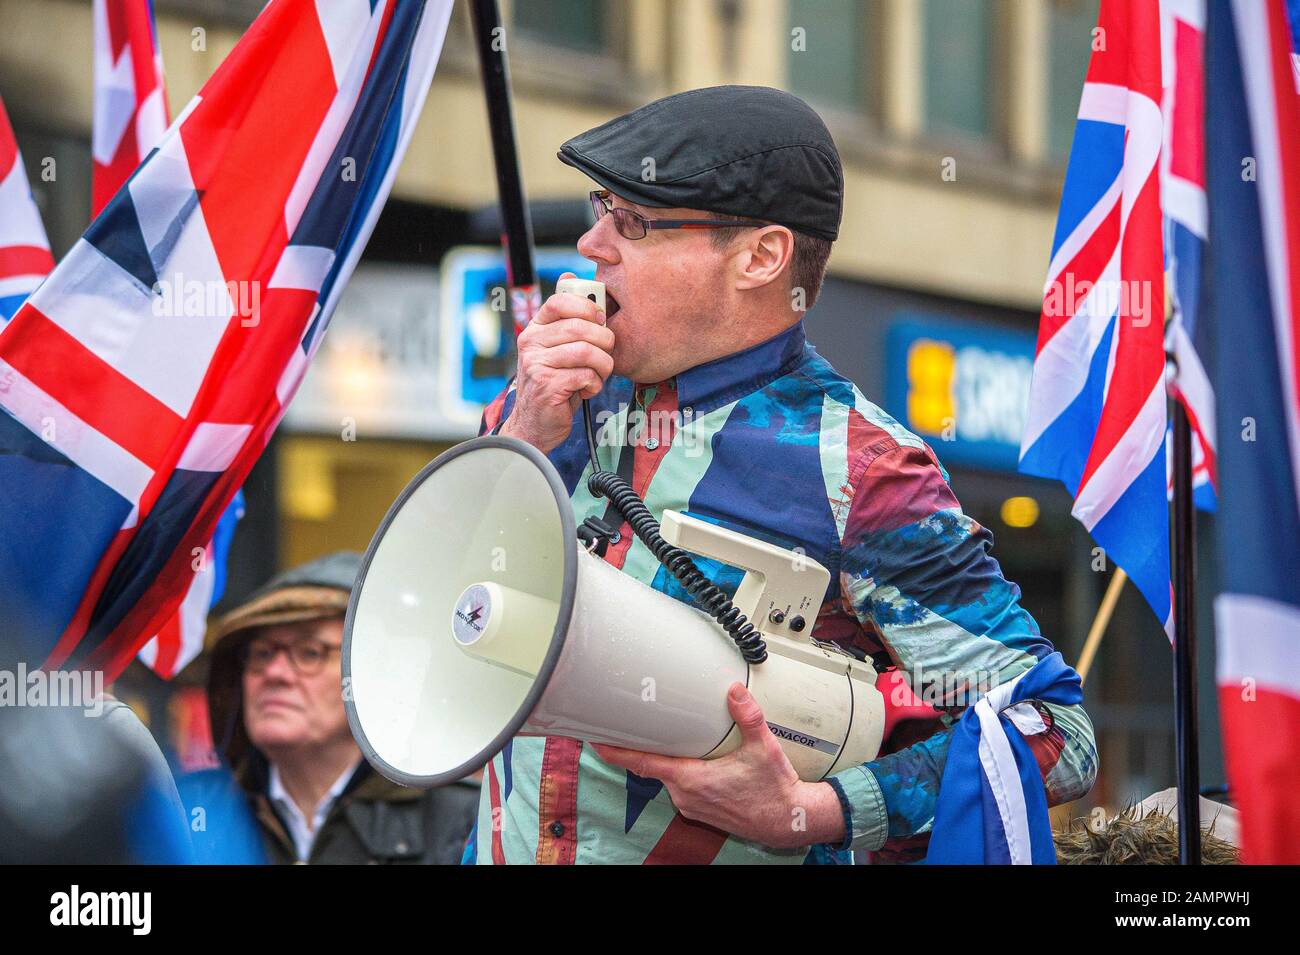 Glasgow, UK. 11th Jan, 2020. Pro-Unionist group leader Alistair McConnachie is seen shouting over his megaphone during the counter-protest.80,000 supporters came out in support of Scottish Independence following the UK General Election and the upcoming date of January 31st when the UK will leave the European Union, dragging Scotland out of it against its will, as a result the group All Under One Banner held an Emergency march through the center of Glasgow to protest against both London rule and Brexit. Credit: Stewart Kirby/SOPA Images/ZUMA Wire/Alamy Live News Stock Photo